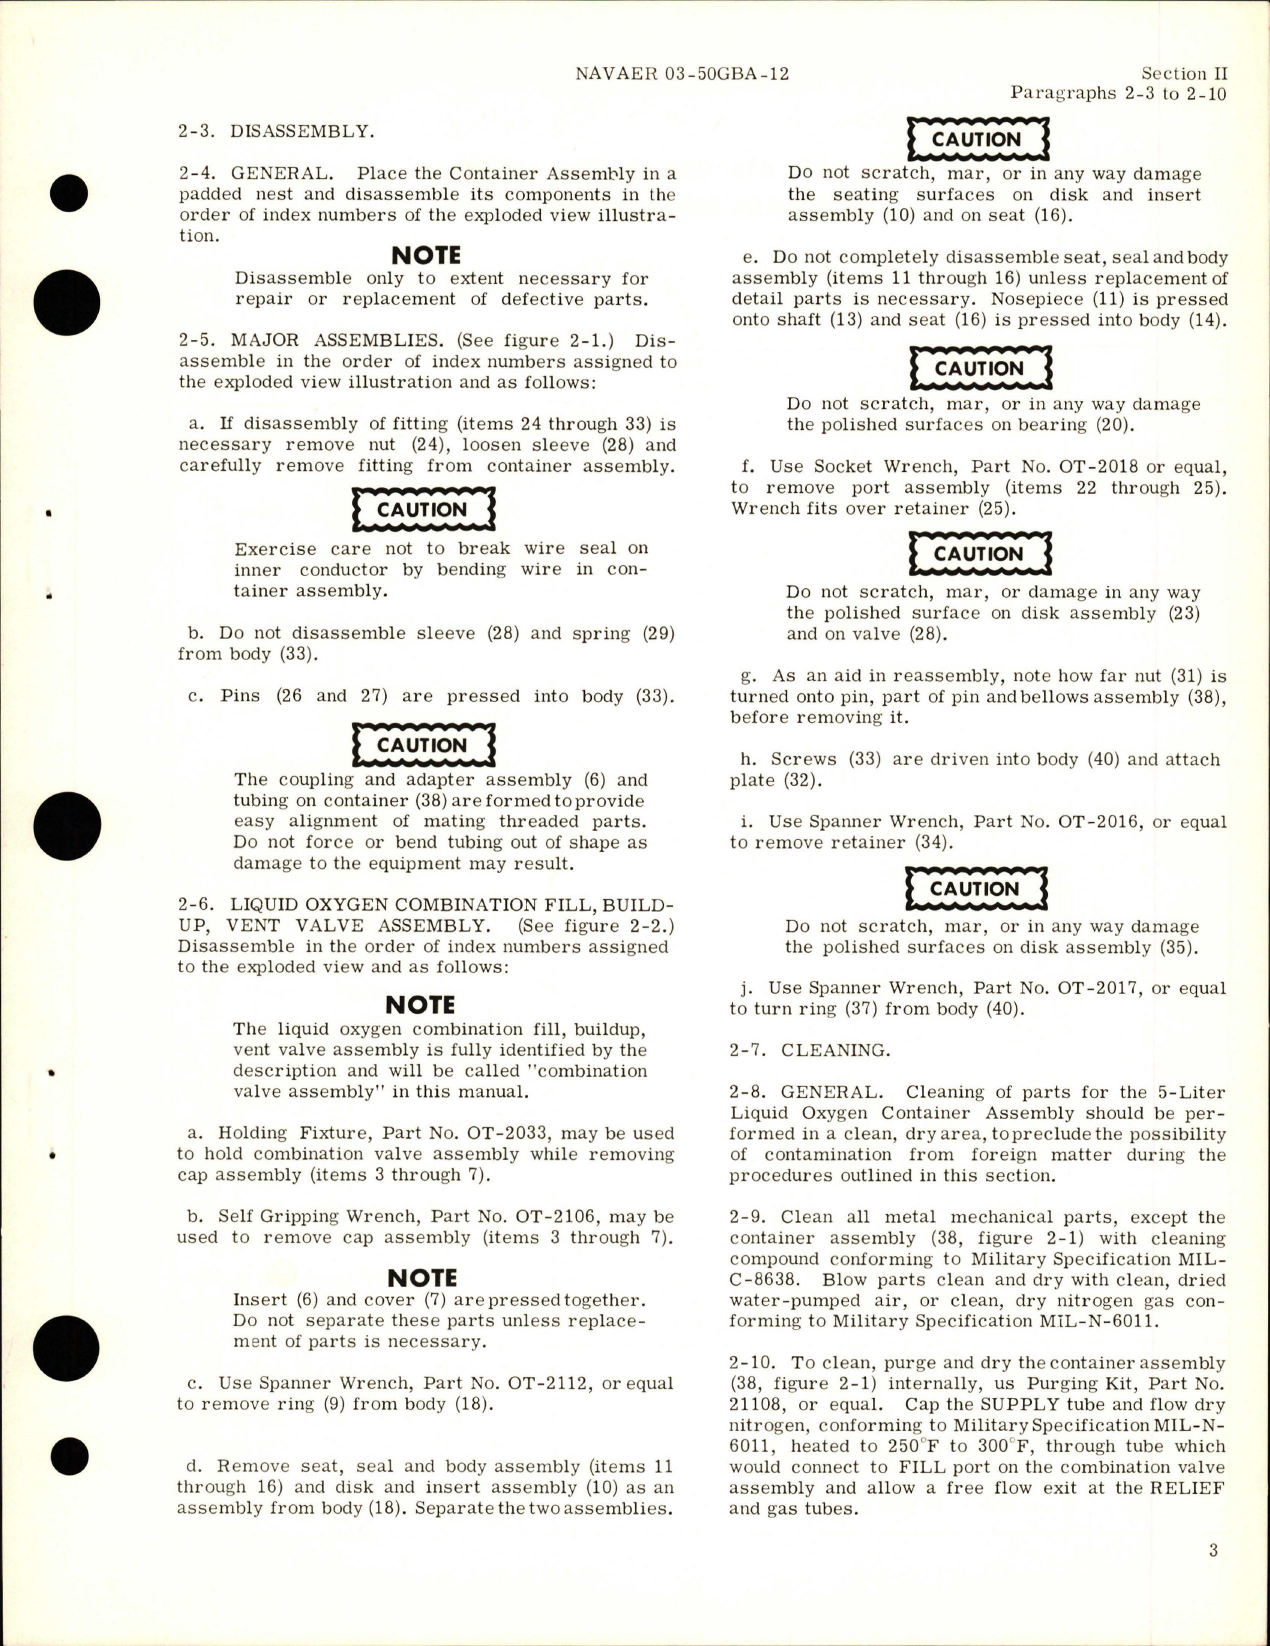 Sample page 5 from AirCorps Library document: Overhaul Instructions for 5-Liter Liquid Oxygen Container Assembly - Part 21062-1 